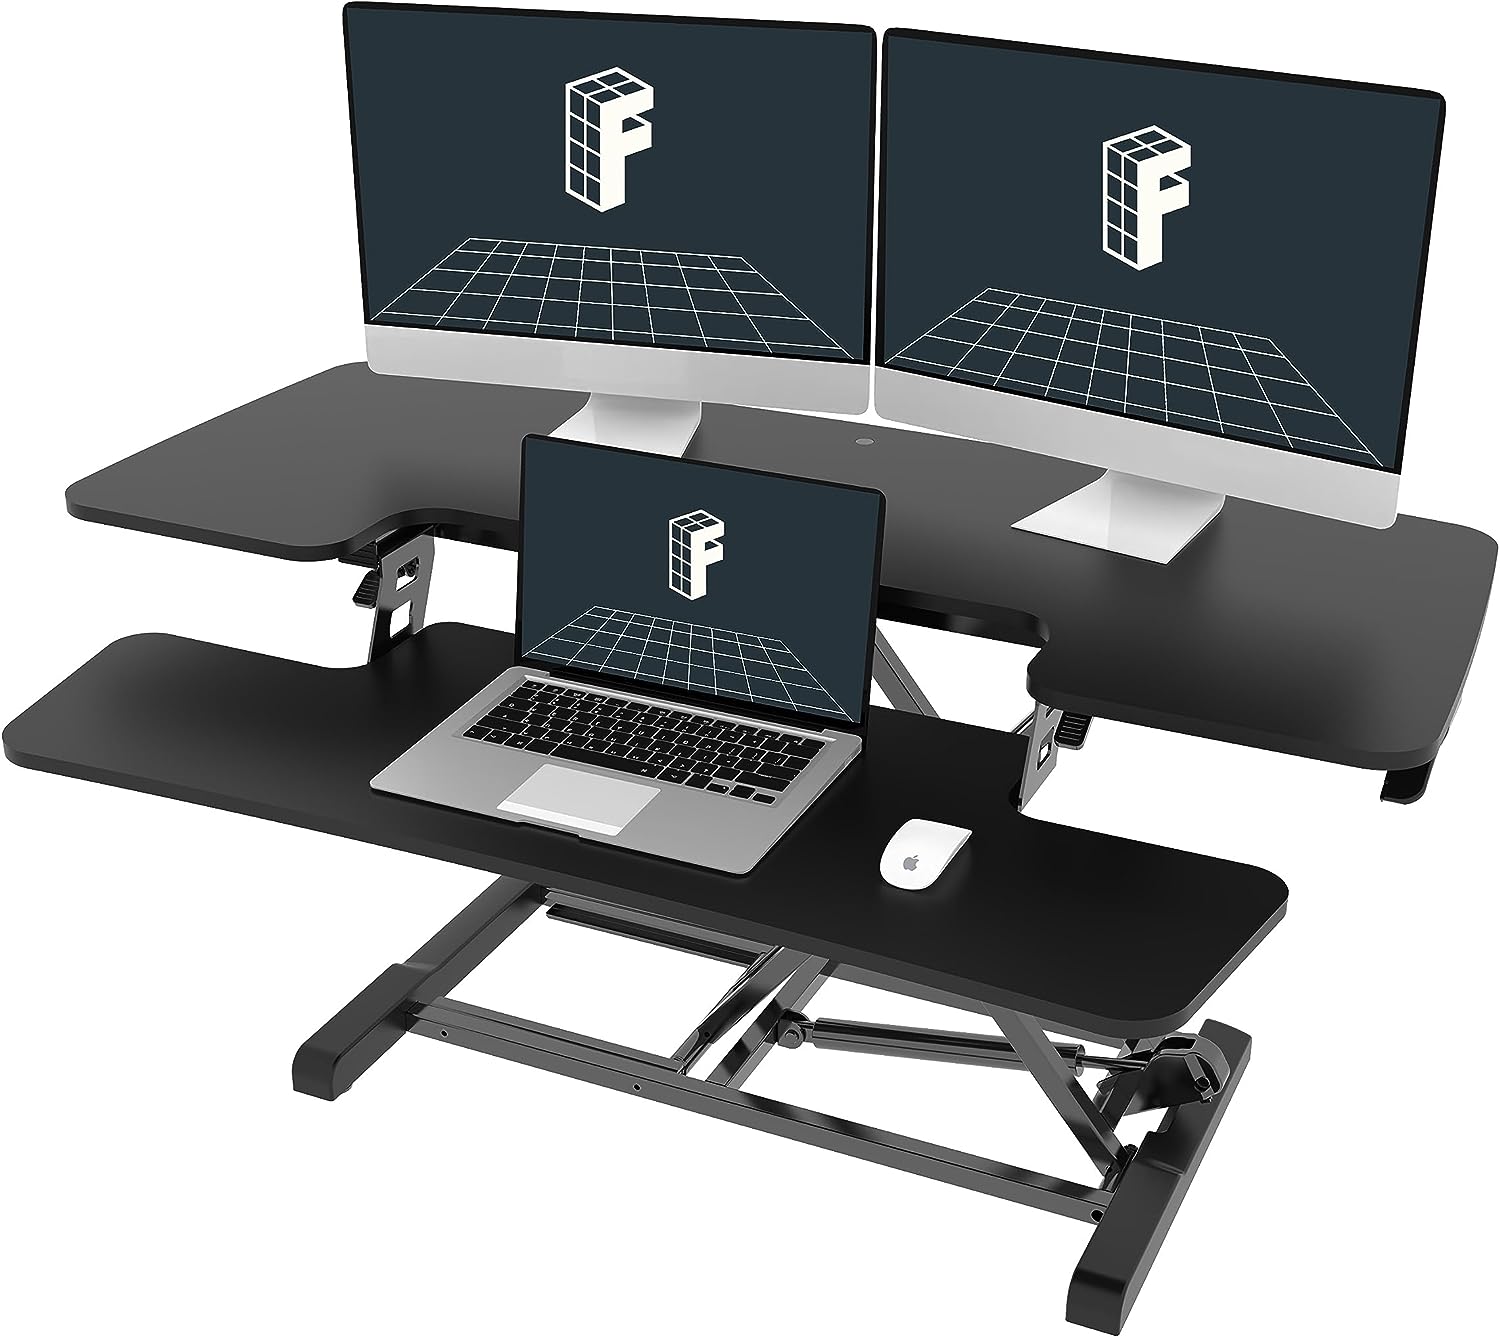 Hurry, Save 28% on FLEXISPOT Standing Desk Converter - Limited Stock!